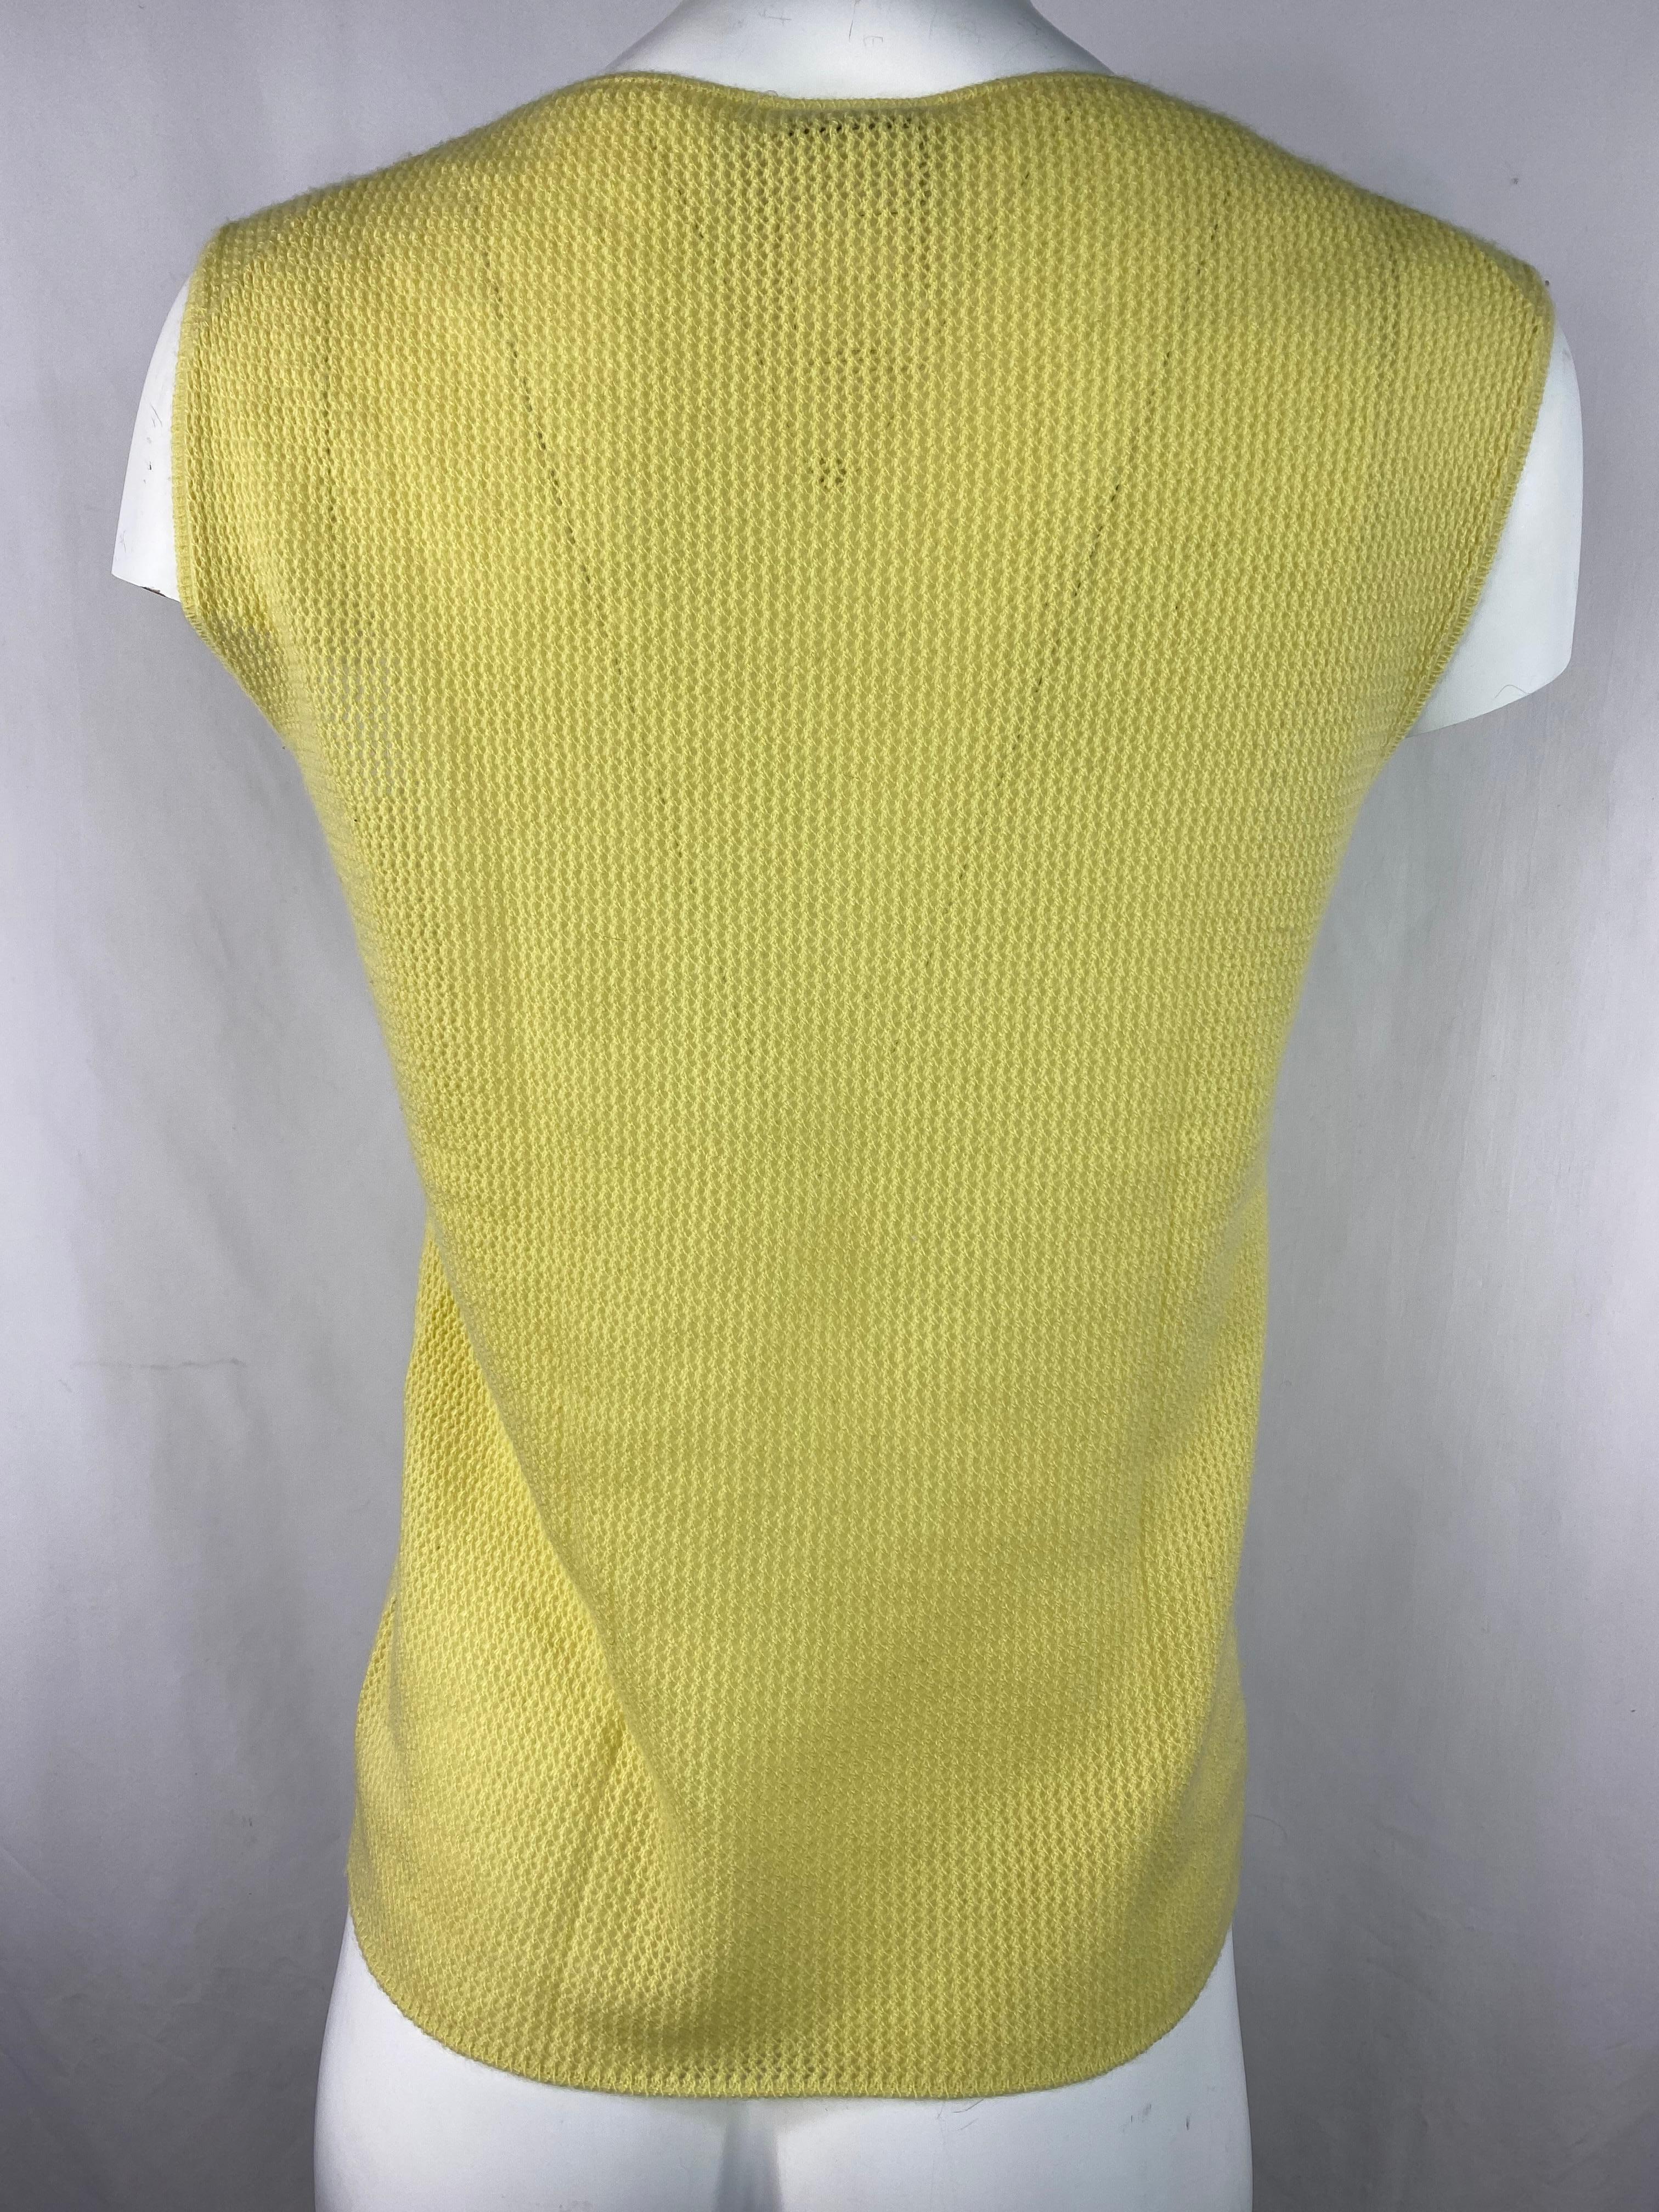 Vintage CHANEL Yellow Cashmere Knit Top, Size 42 In Excellent Condition For Sale In Beverly Hills, CA